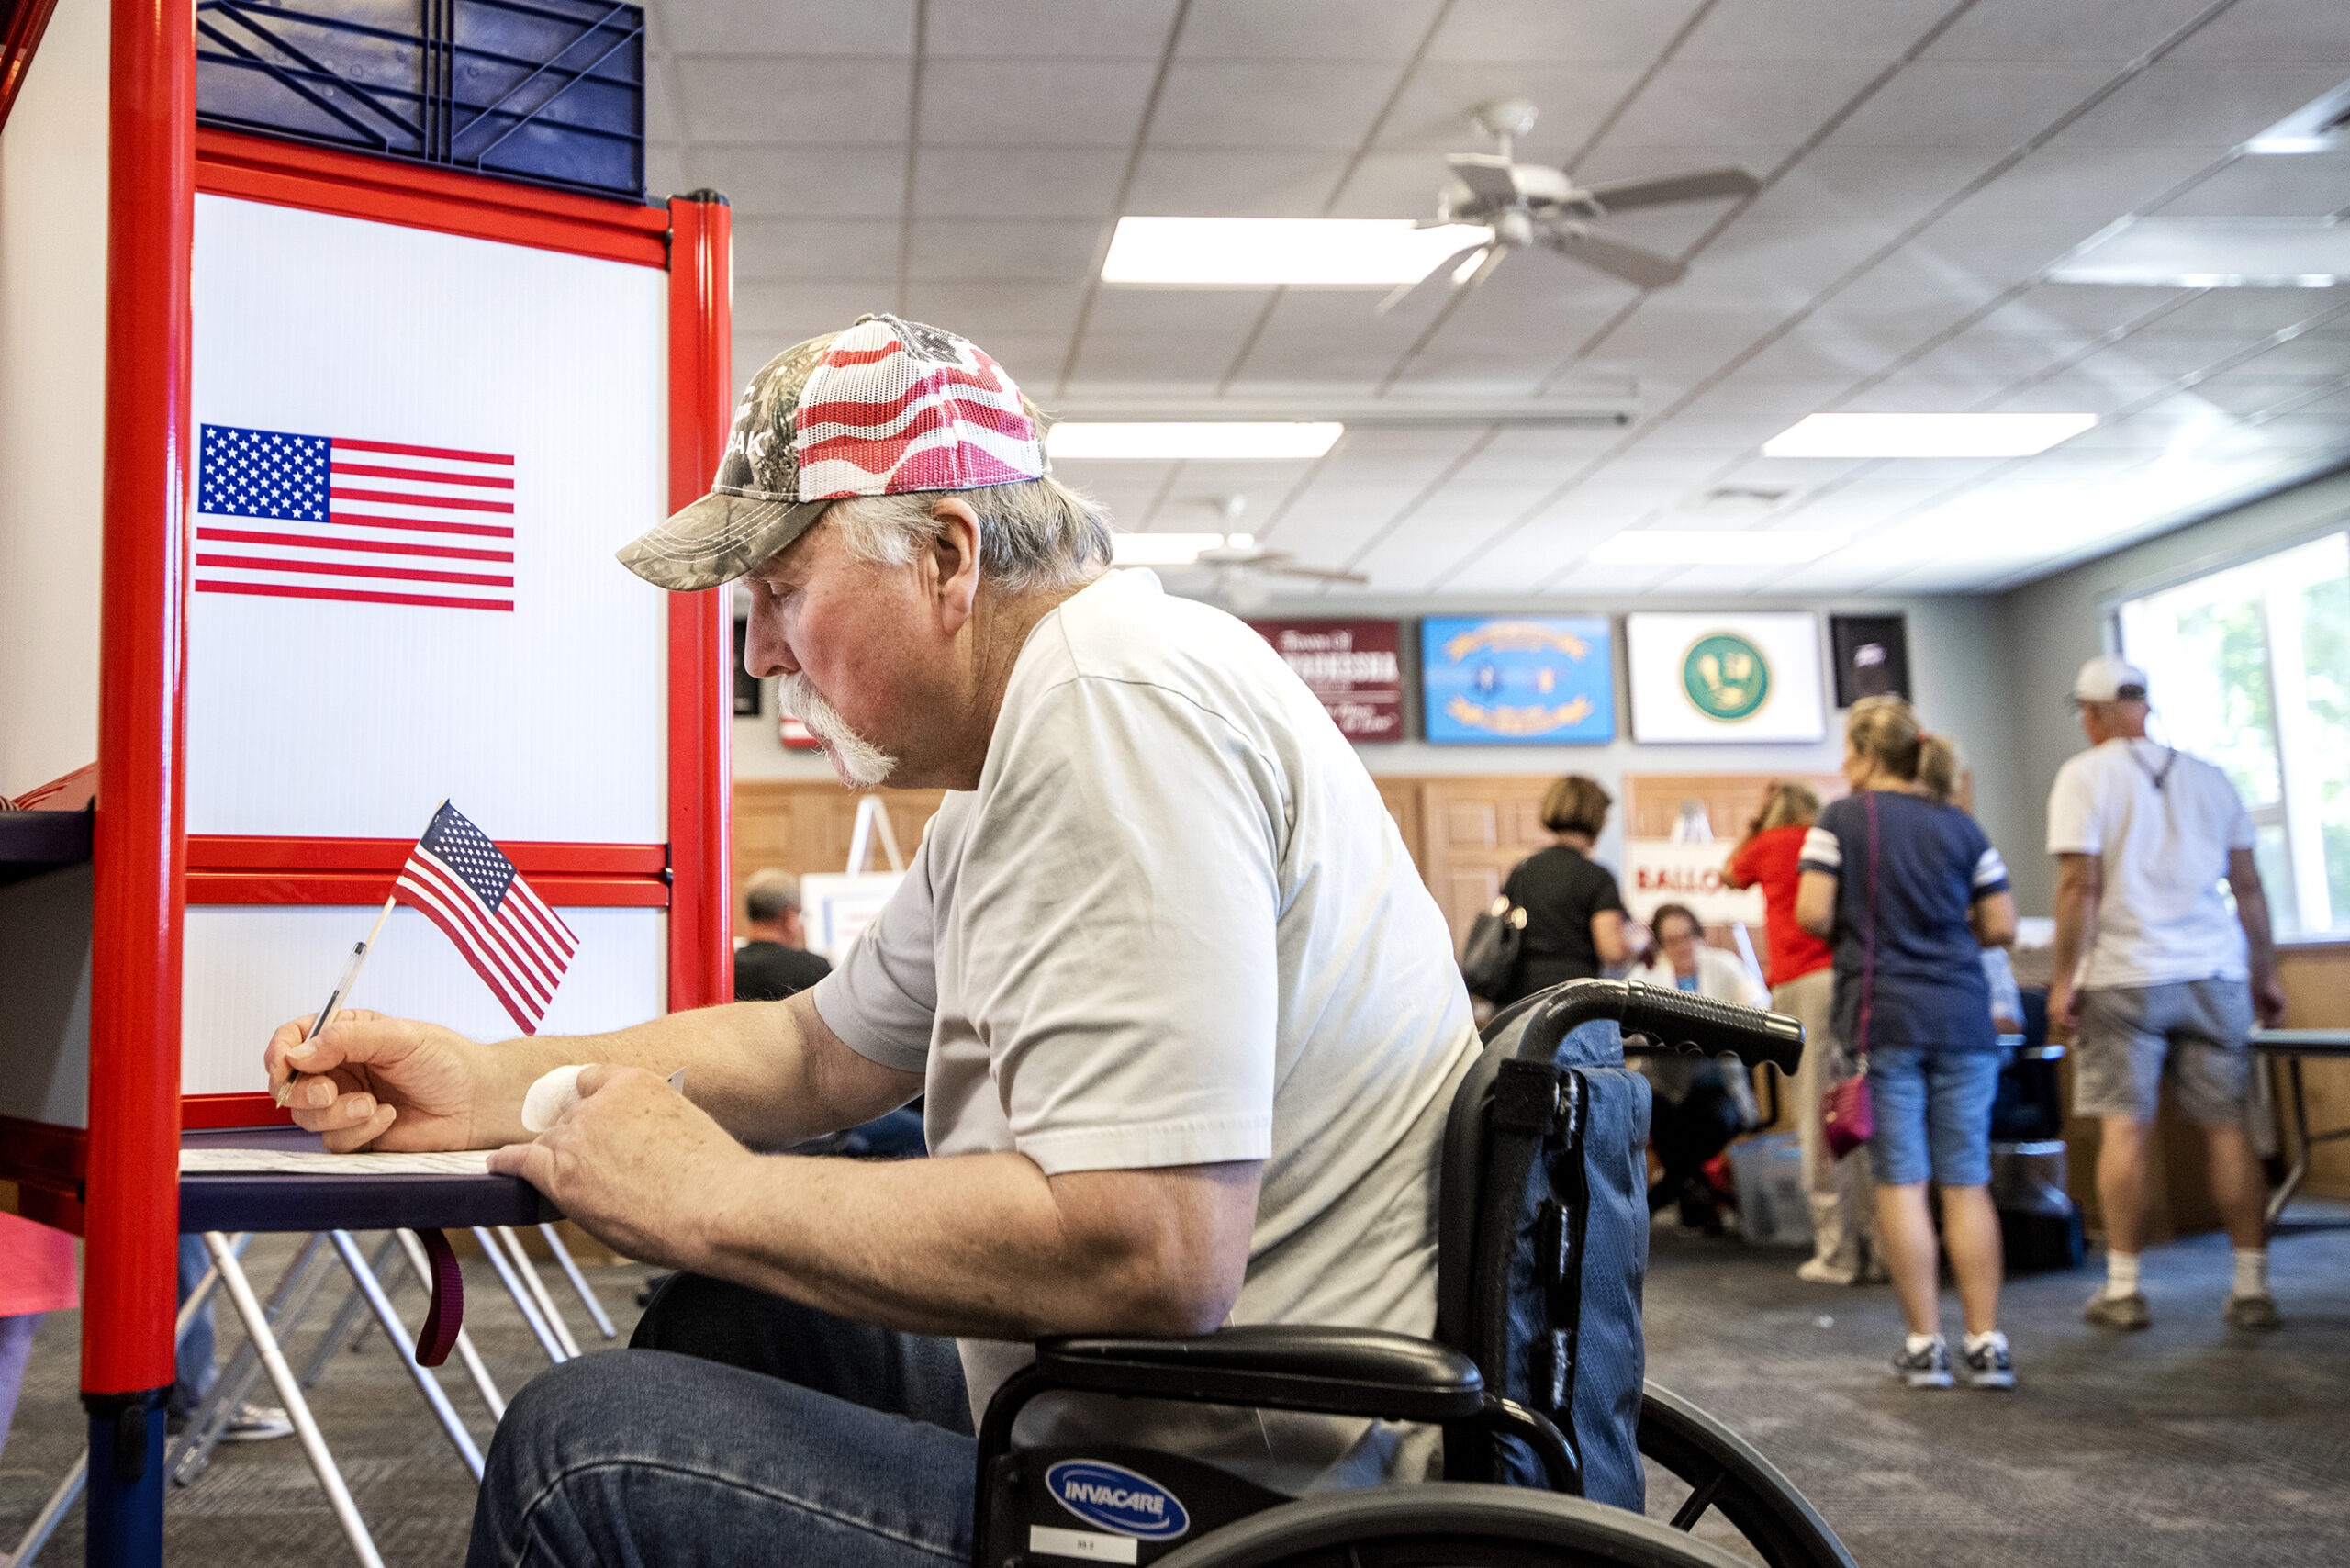 A man wears a hat with a U.S. flag pattern and writes with a pen with a flag attached as he votes at a booth with a flag decoration.